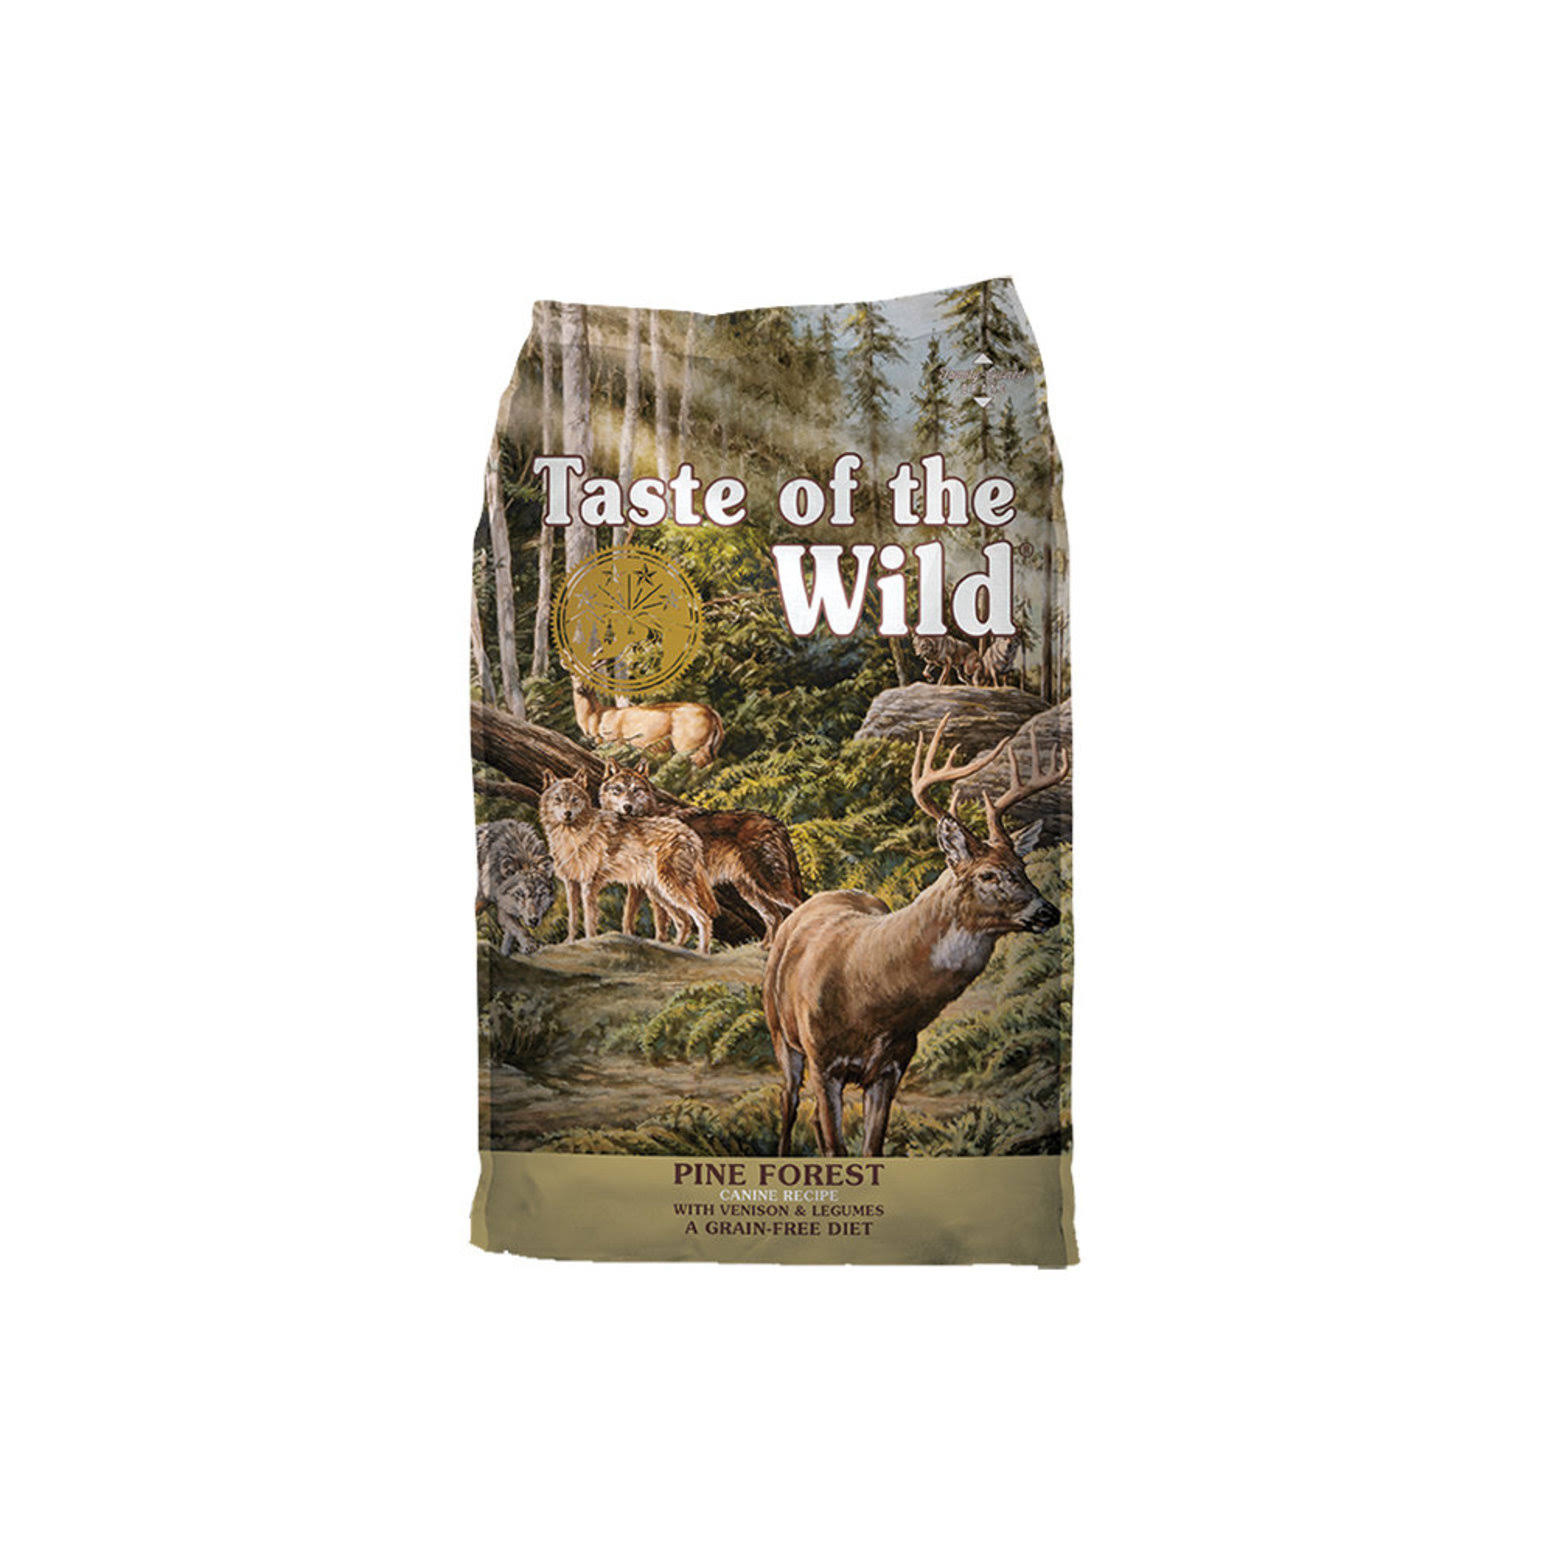 Taste of the Wild Pine Forest with Venison & Legumes Dog Food [5lb]